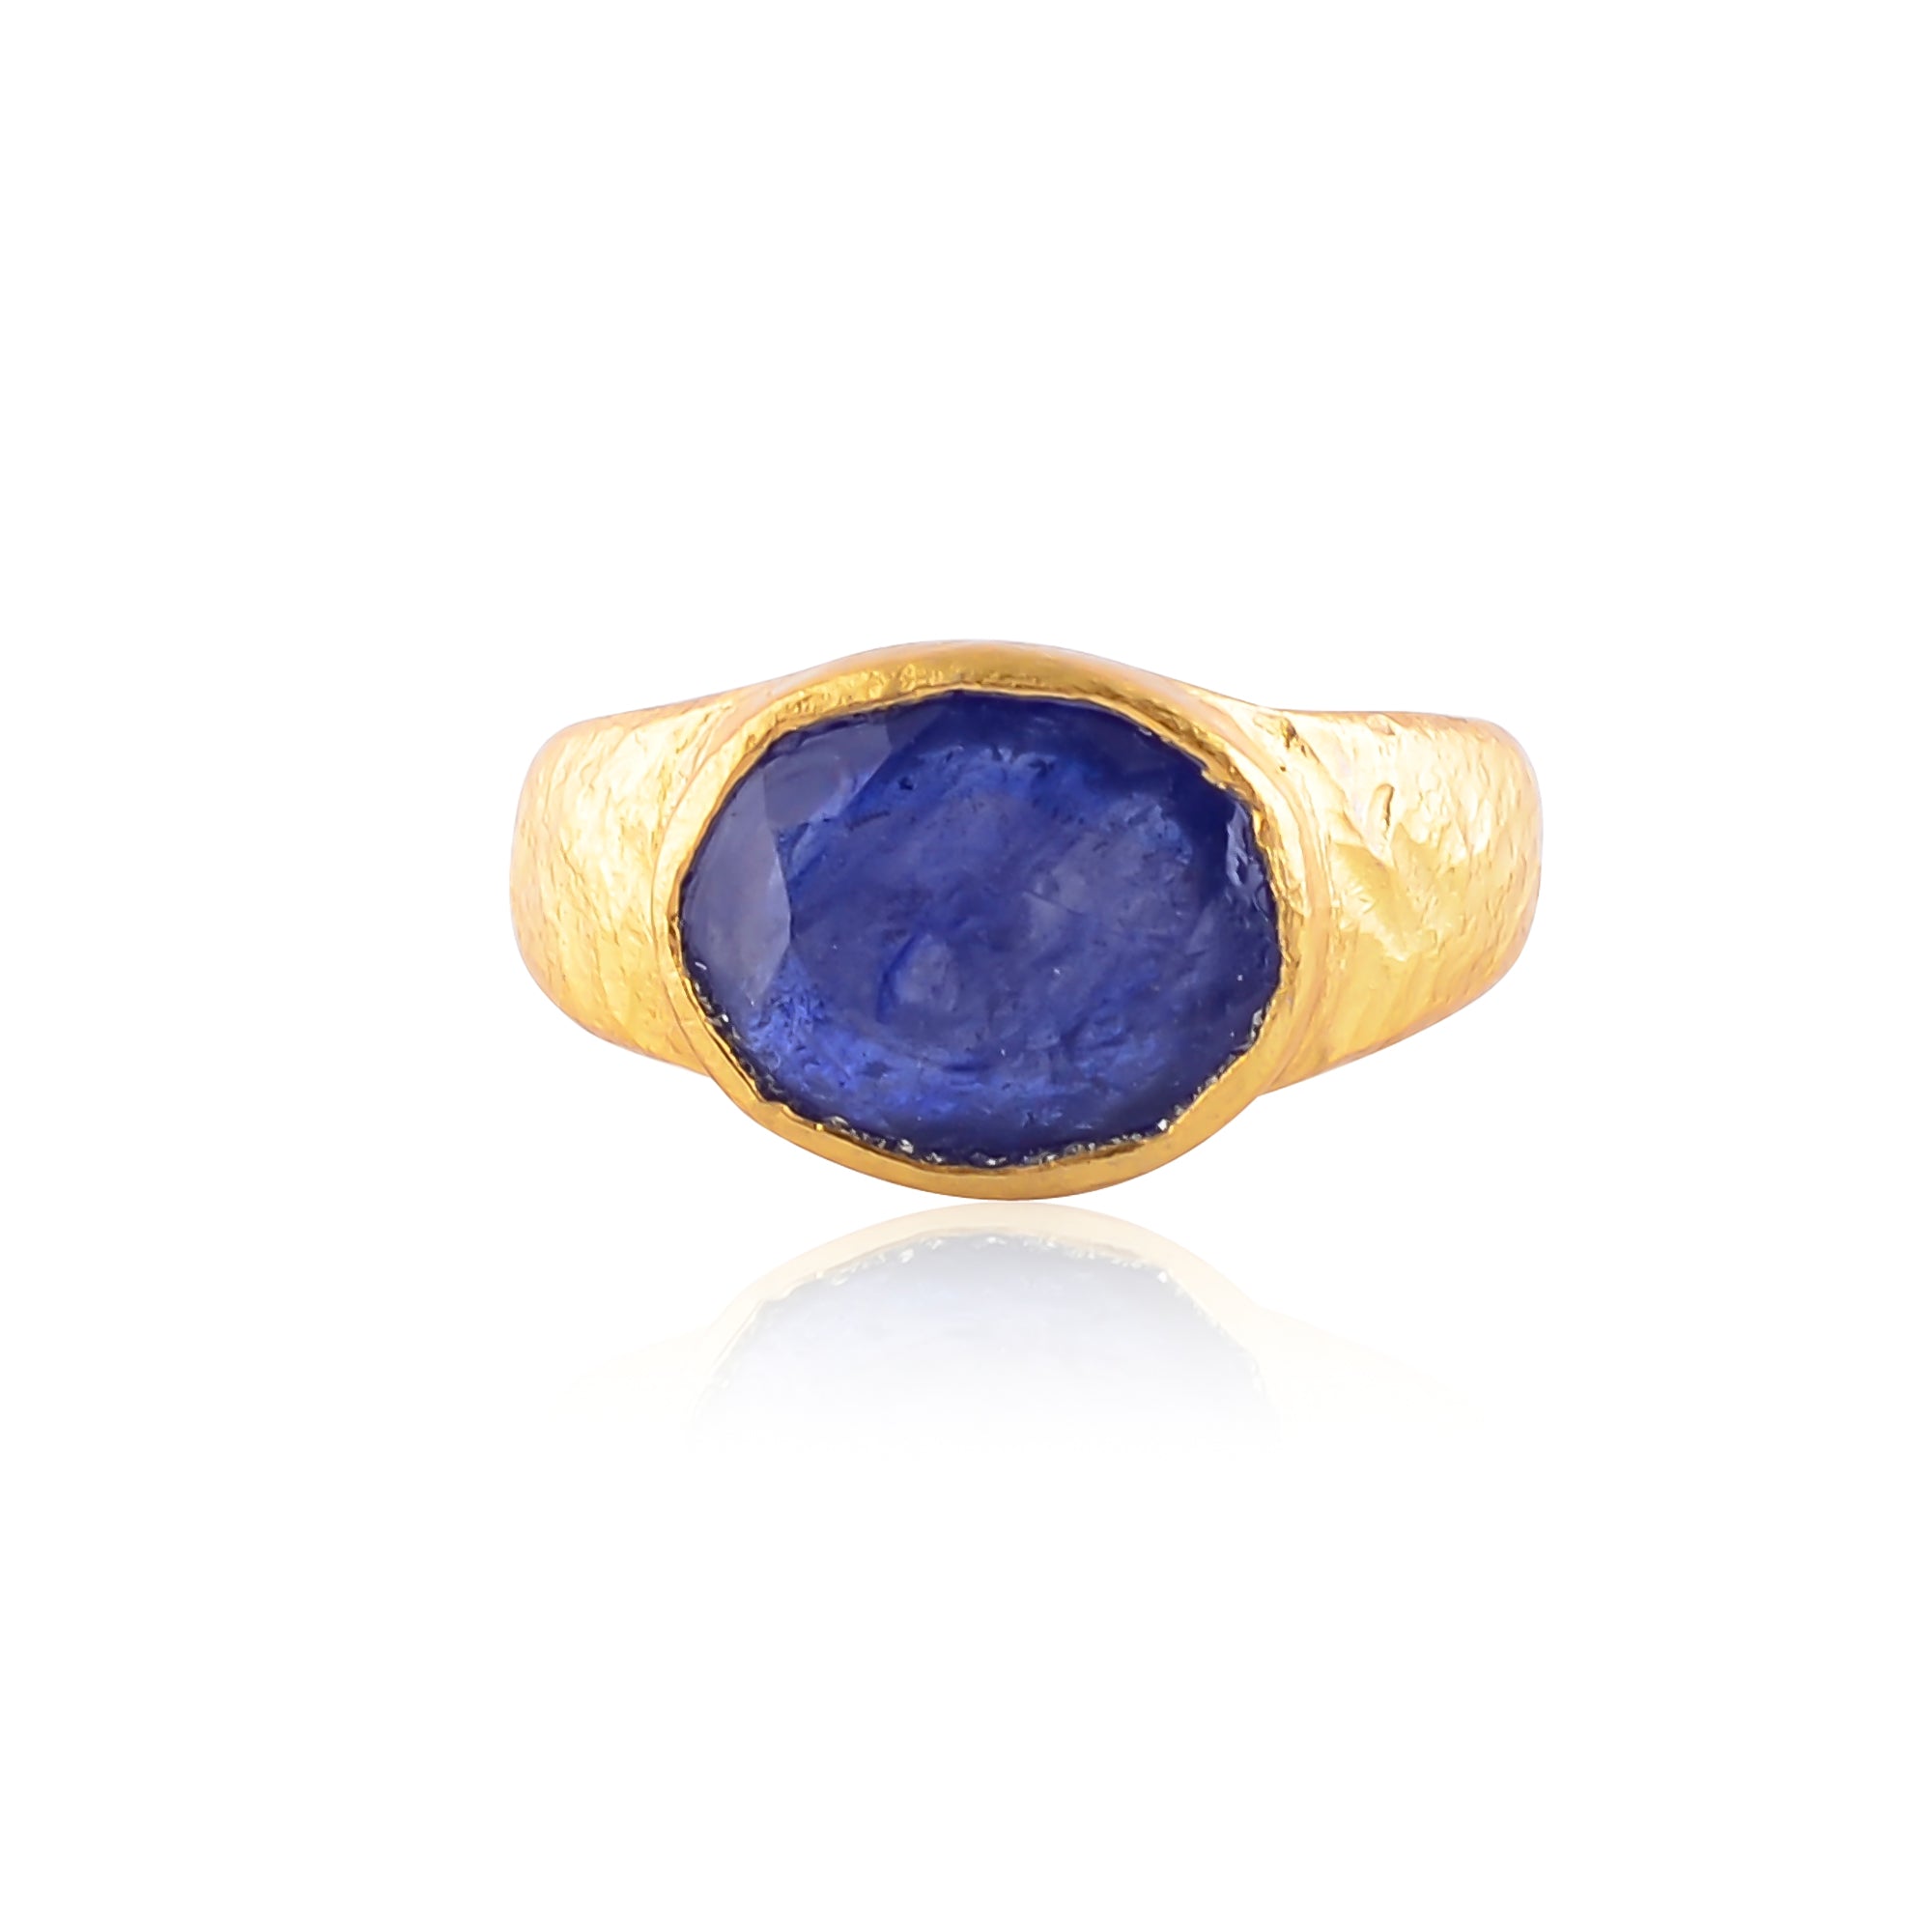 Buy Indian Handcrafted Silver Gold Plated Blue Saphire Ring